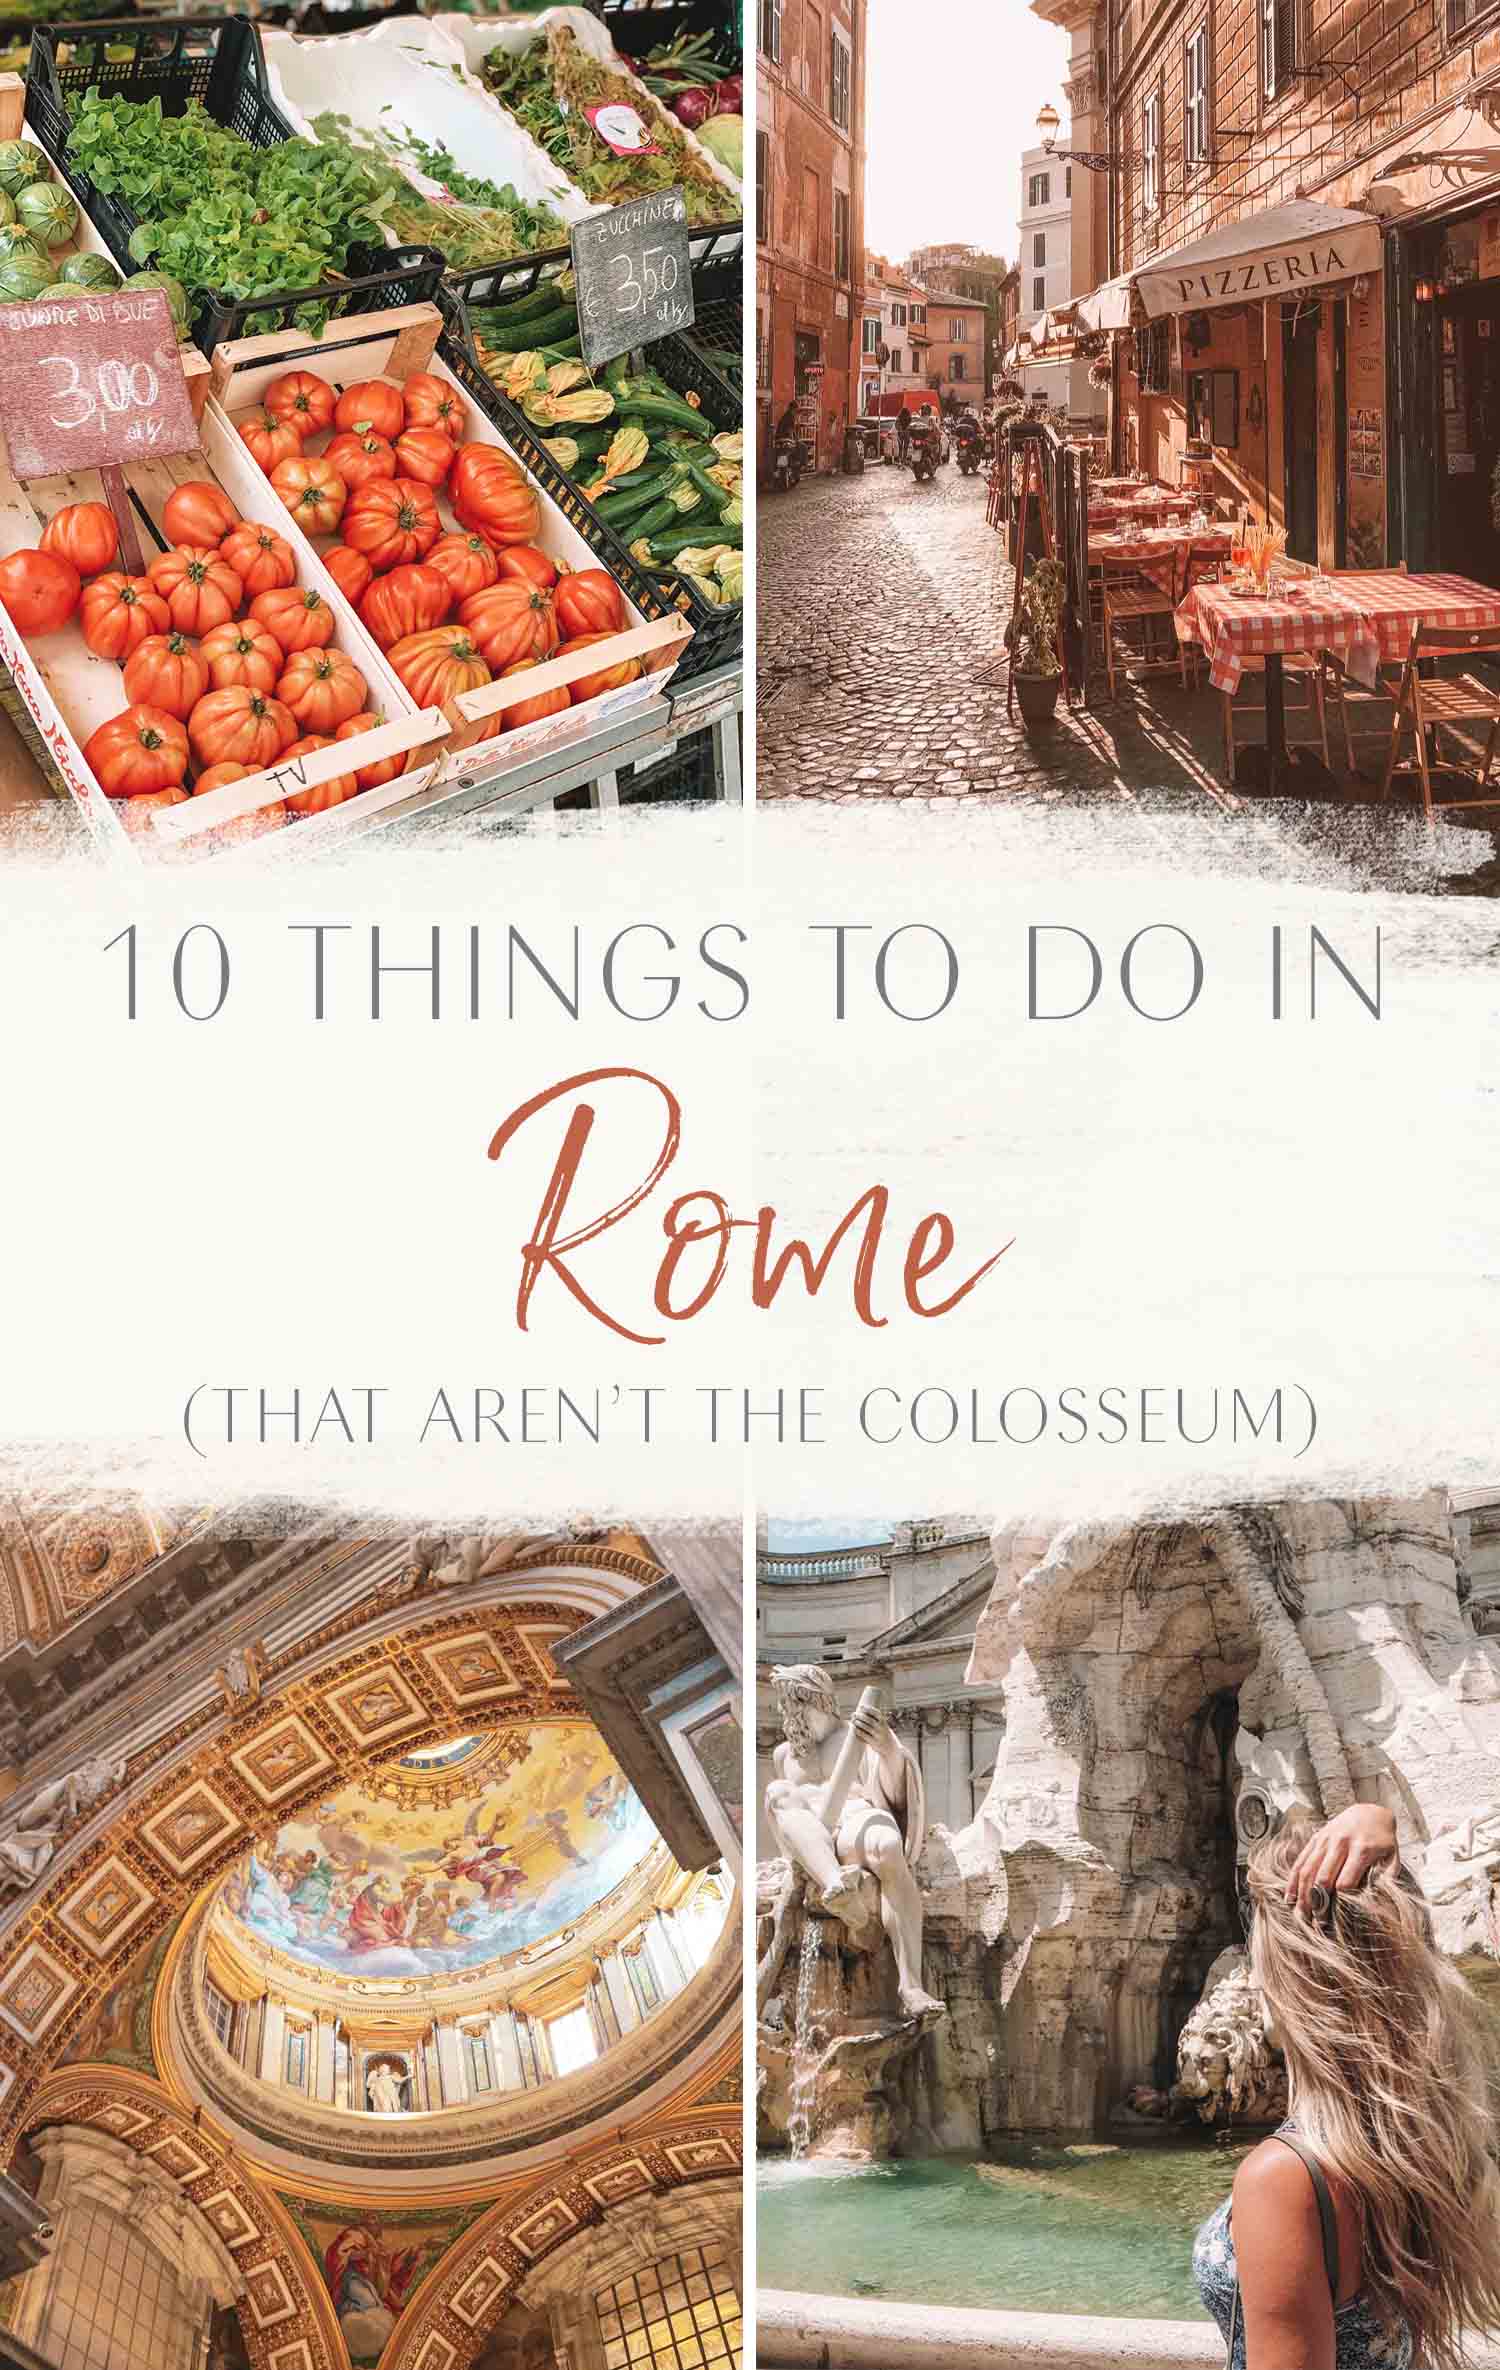 10 Things to Do in Rome